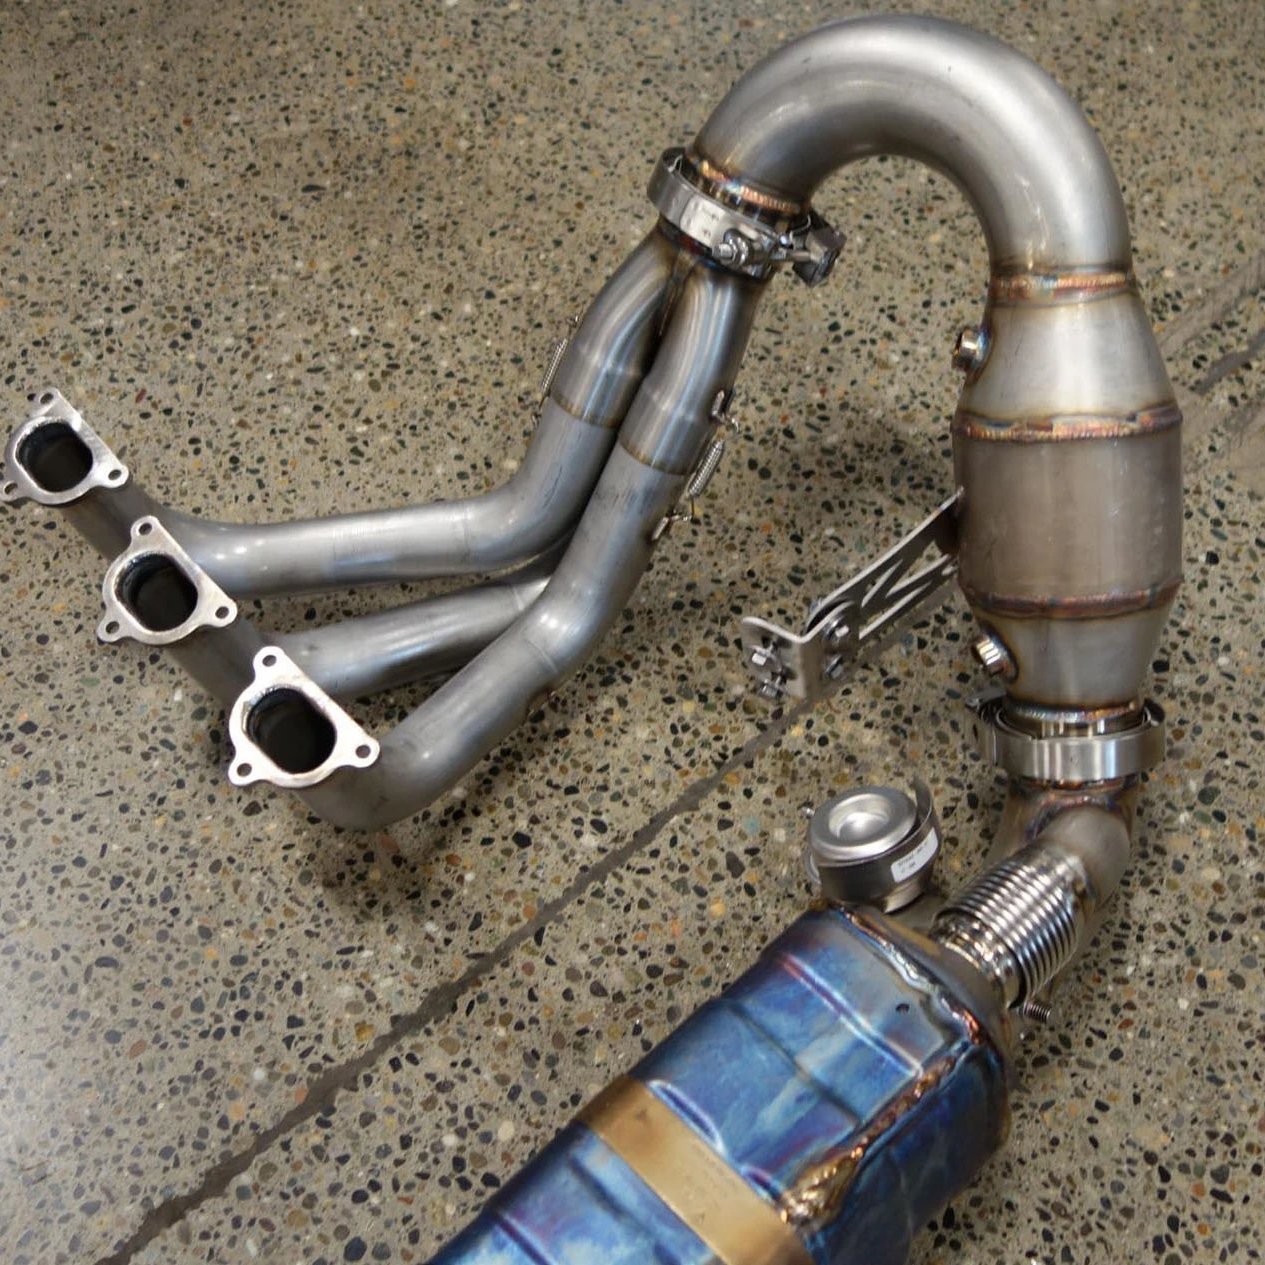 991.2 GT3 Touring Long Tube Street Header Exhaust System - Dundon Motorsports